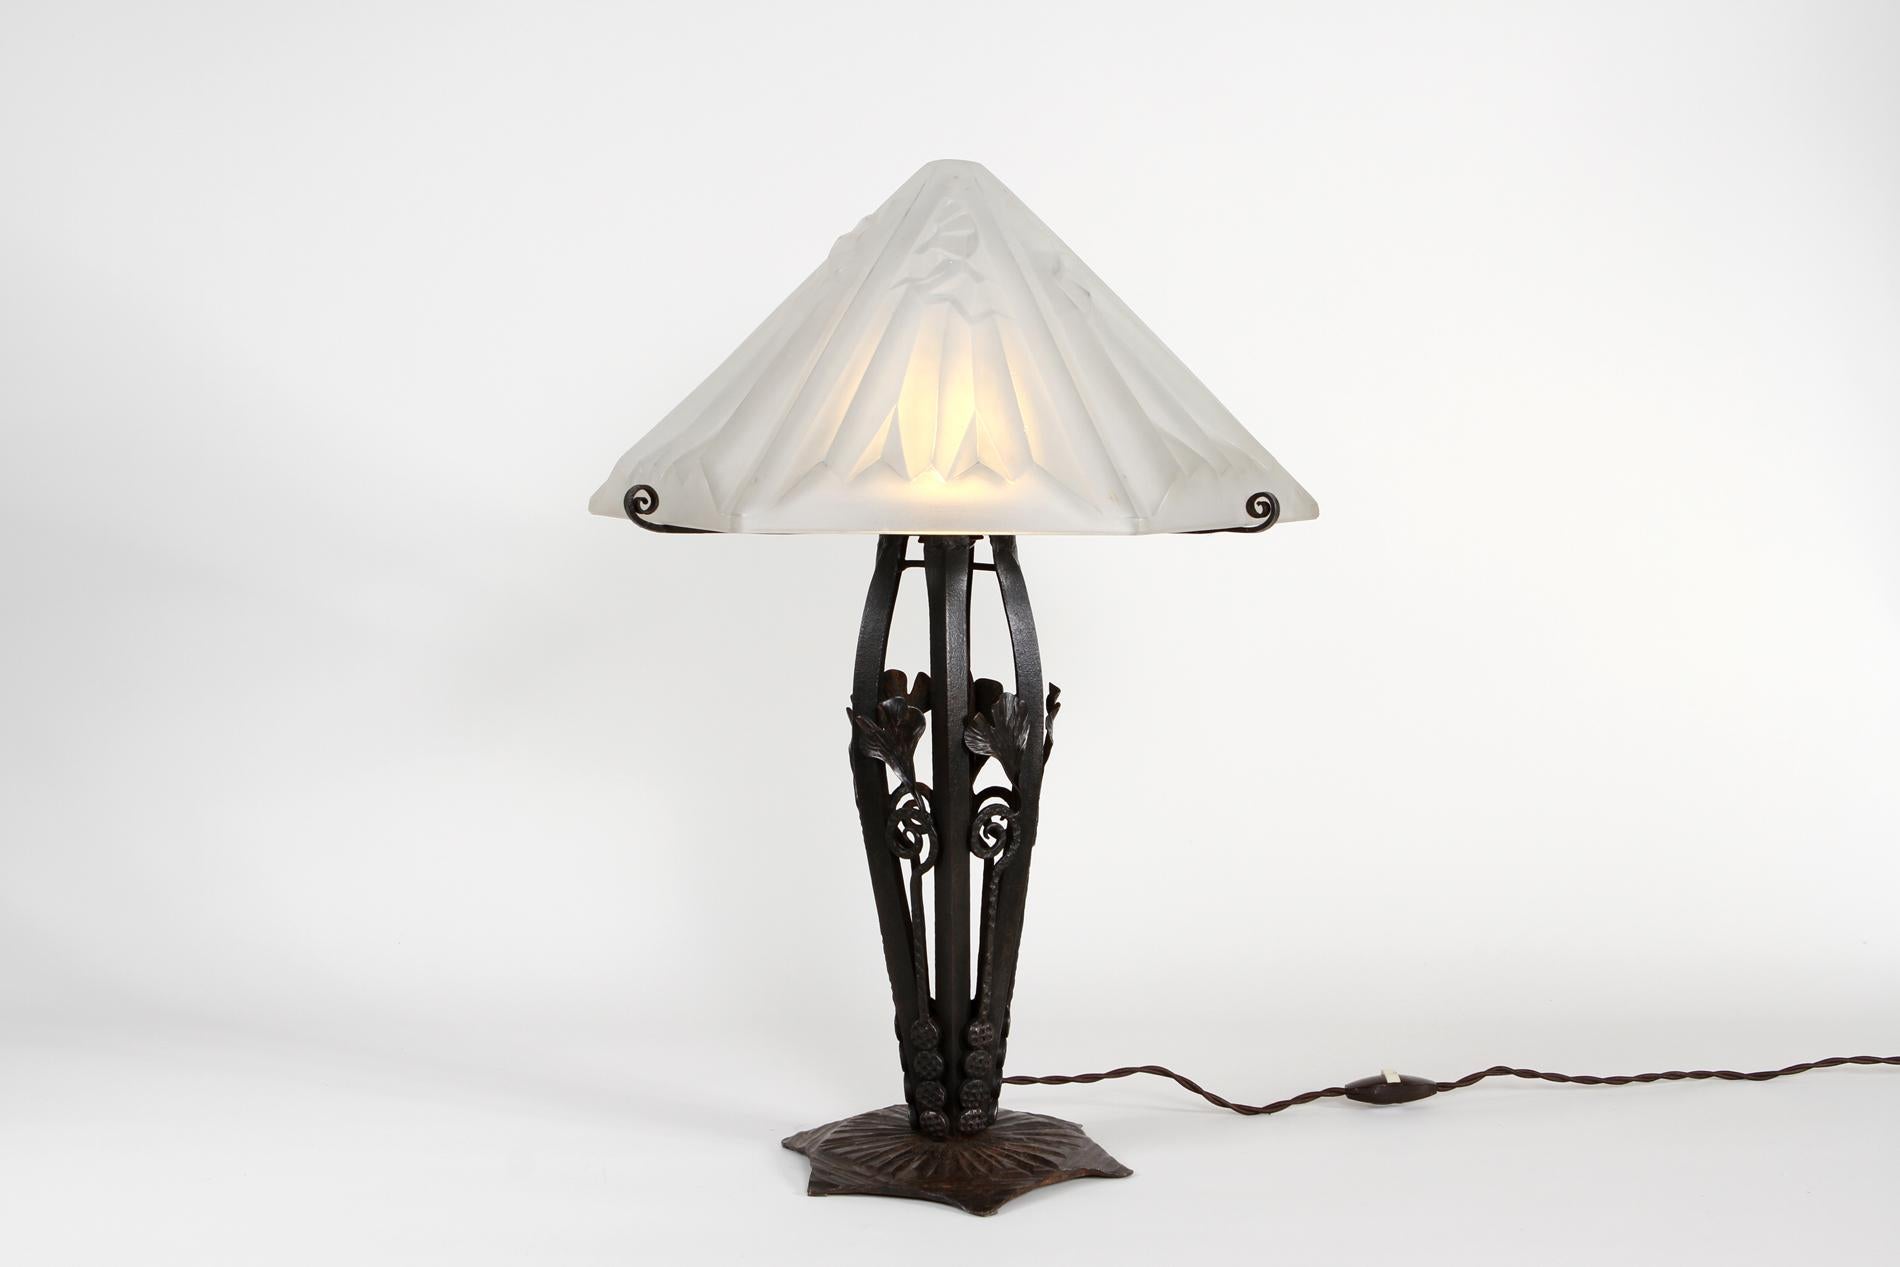 Original French Art Deco table lamp by Degué, base in wrought iron and lampshade by Degué, signed. The originality of the lamp is the shape of the lampshade with the iconic Degué decor. Big model making a beautiful light bringing elegance to the